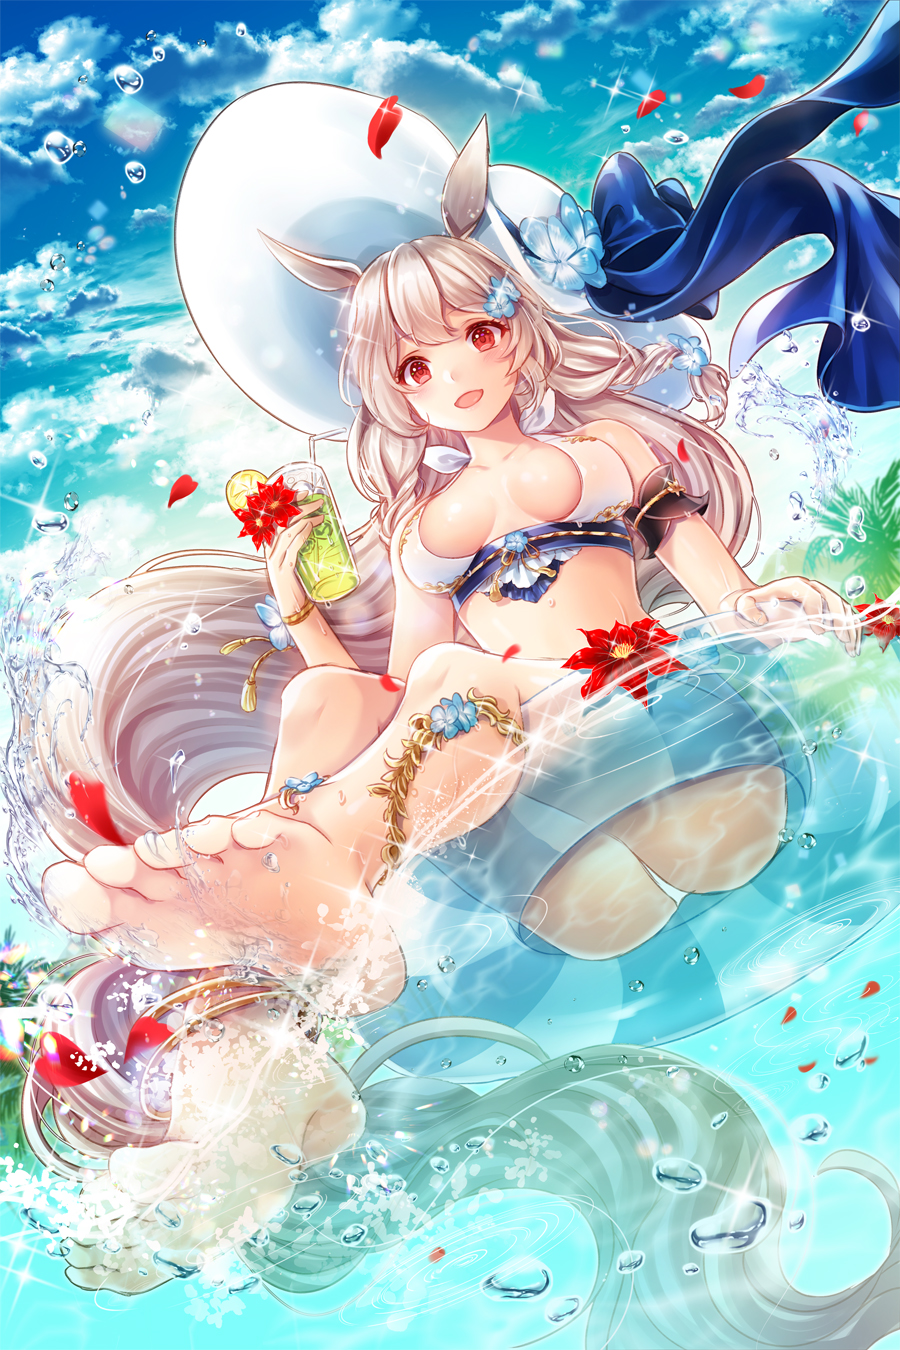 Anime 900x1350 houchi shoujo low-angle anime girls white bikini Kouson san (Houchi Shoujo) animal ears big boobs bikini looking at viewer water hair ornament water drops flowers petals open mouth floater splashes toes sitting ass sunlight cocktails drink swimwear jewelry blushing sparkles palm trees long hair sun hats Hobak red flowers bubbles summer armlet anklet smiling portrait display hat gray hair trees blonde windy sea lens flare feet